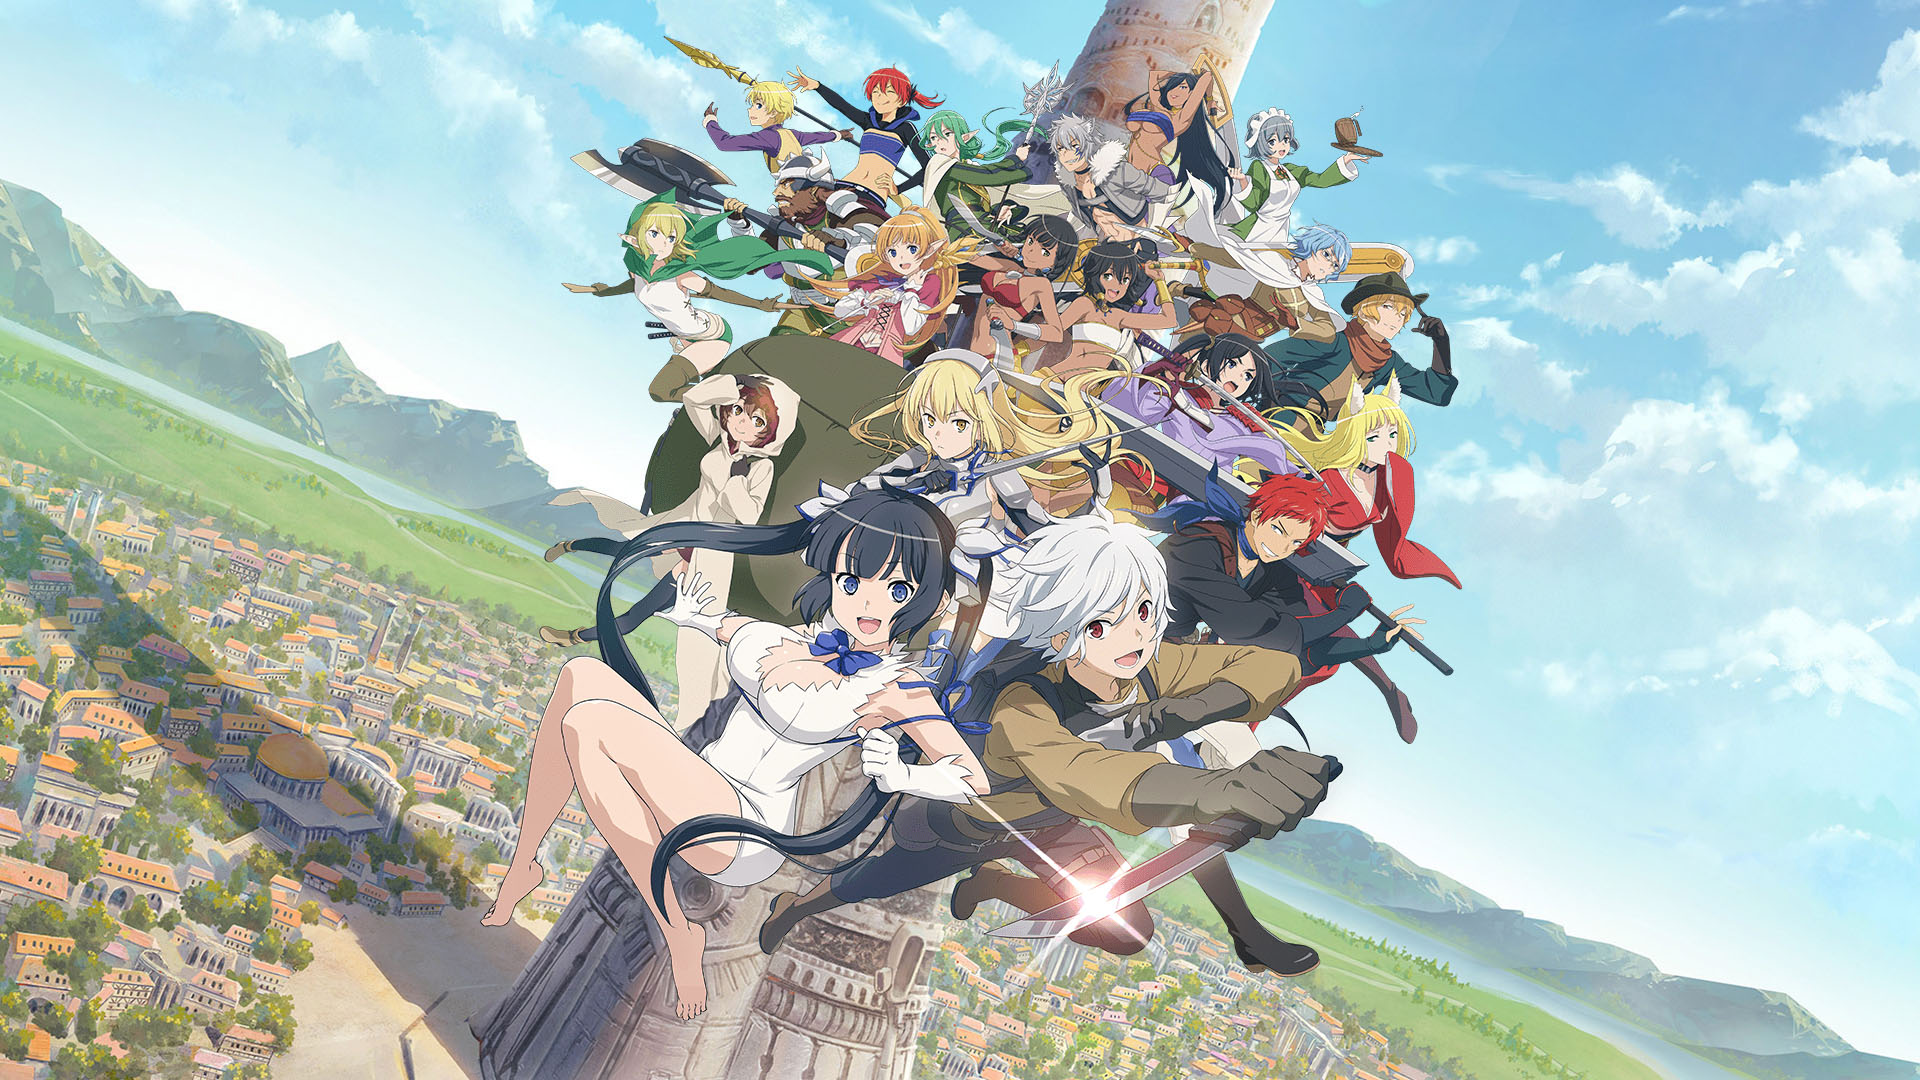 Danmachi Battle Chronicle launches the second part of Summer event